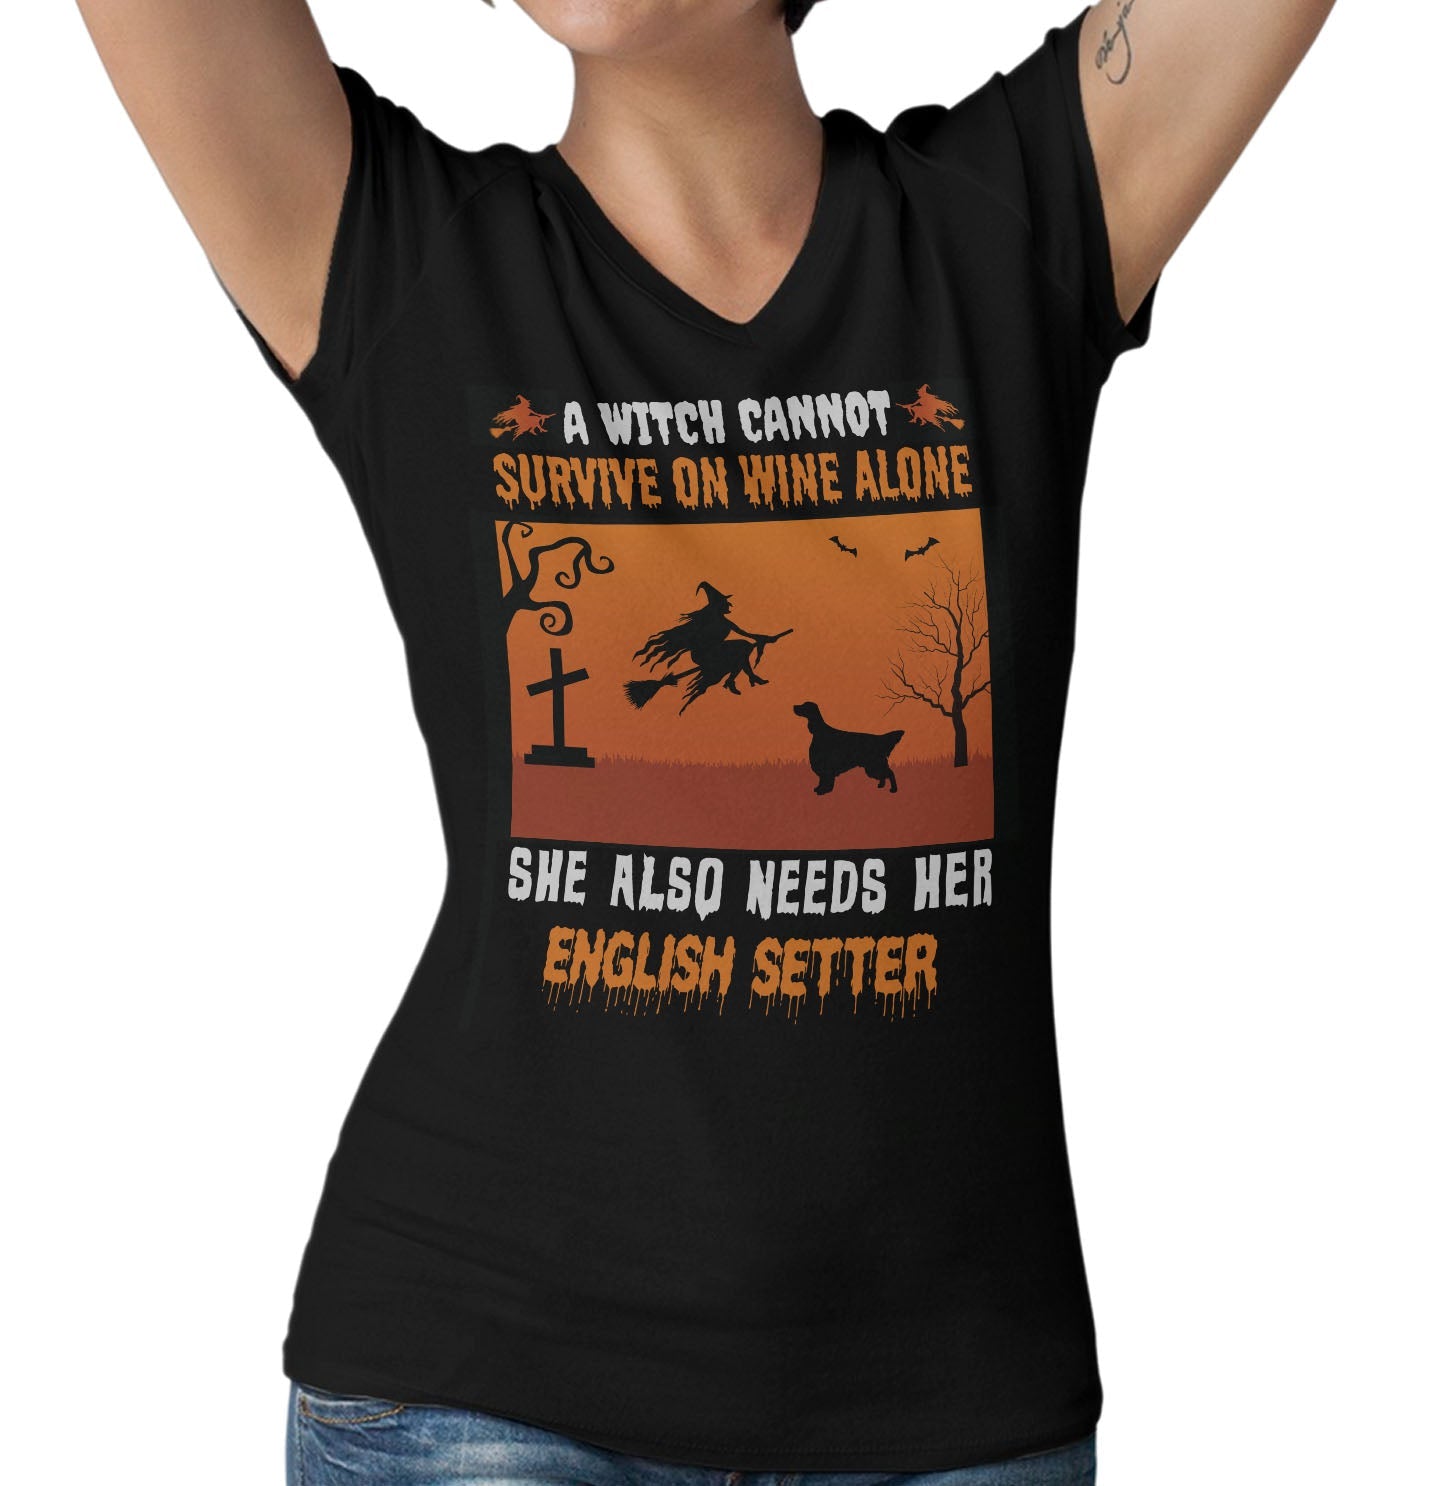 A Witch Needs Her English Setter - Women's V-Neck T-Shirt